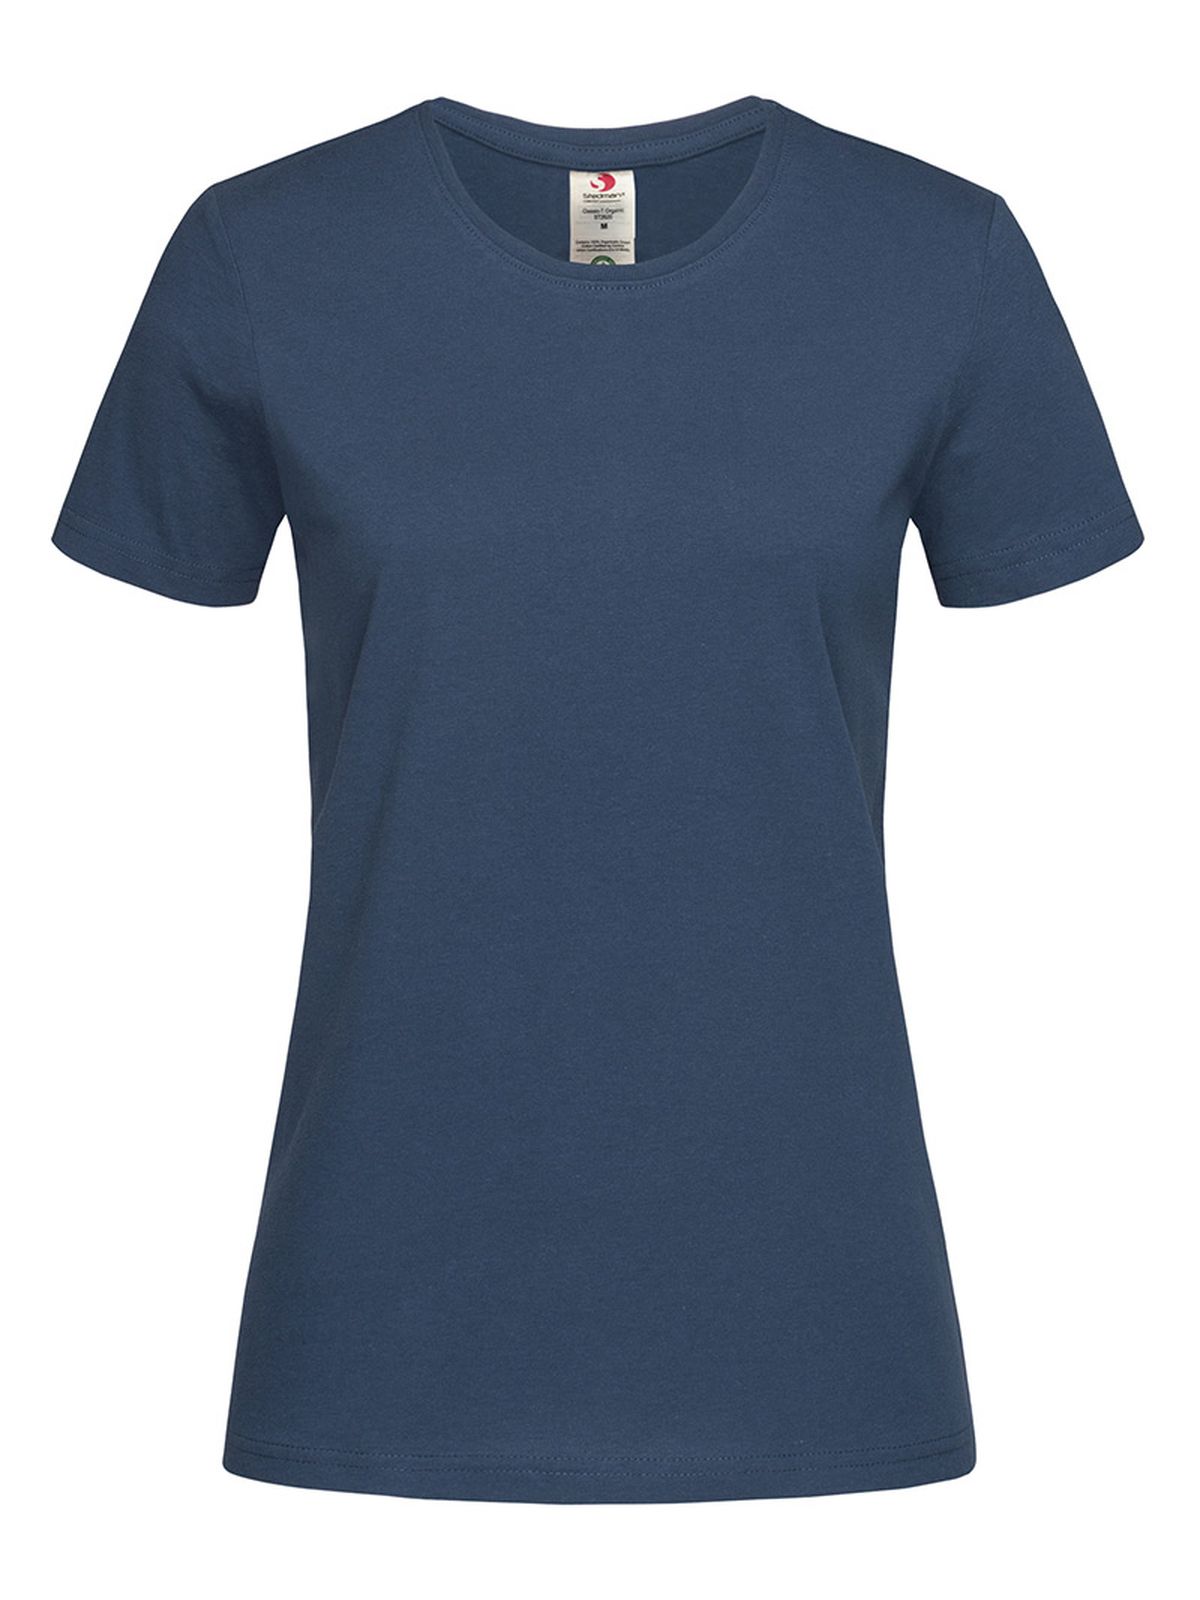 classic-t-organic-fitted-navy-blue.webp